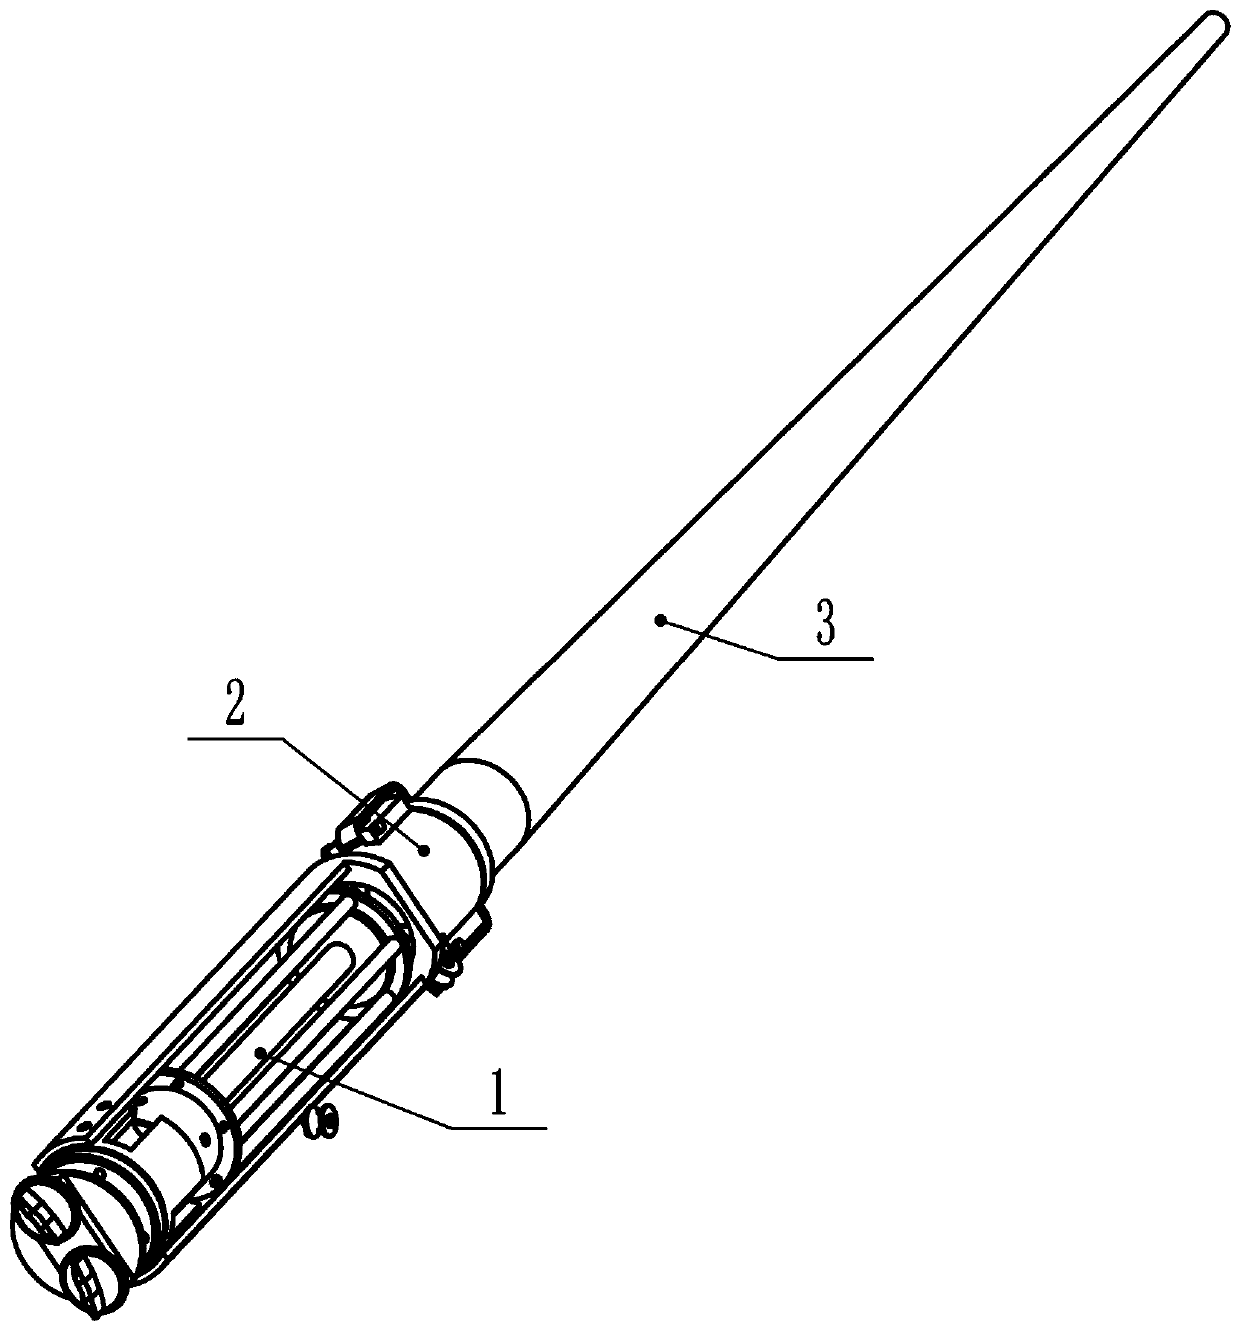 Long spindle with sheath suitable for high-performance fibre weaving, and rapid bobbin replacing device